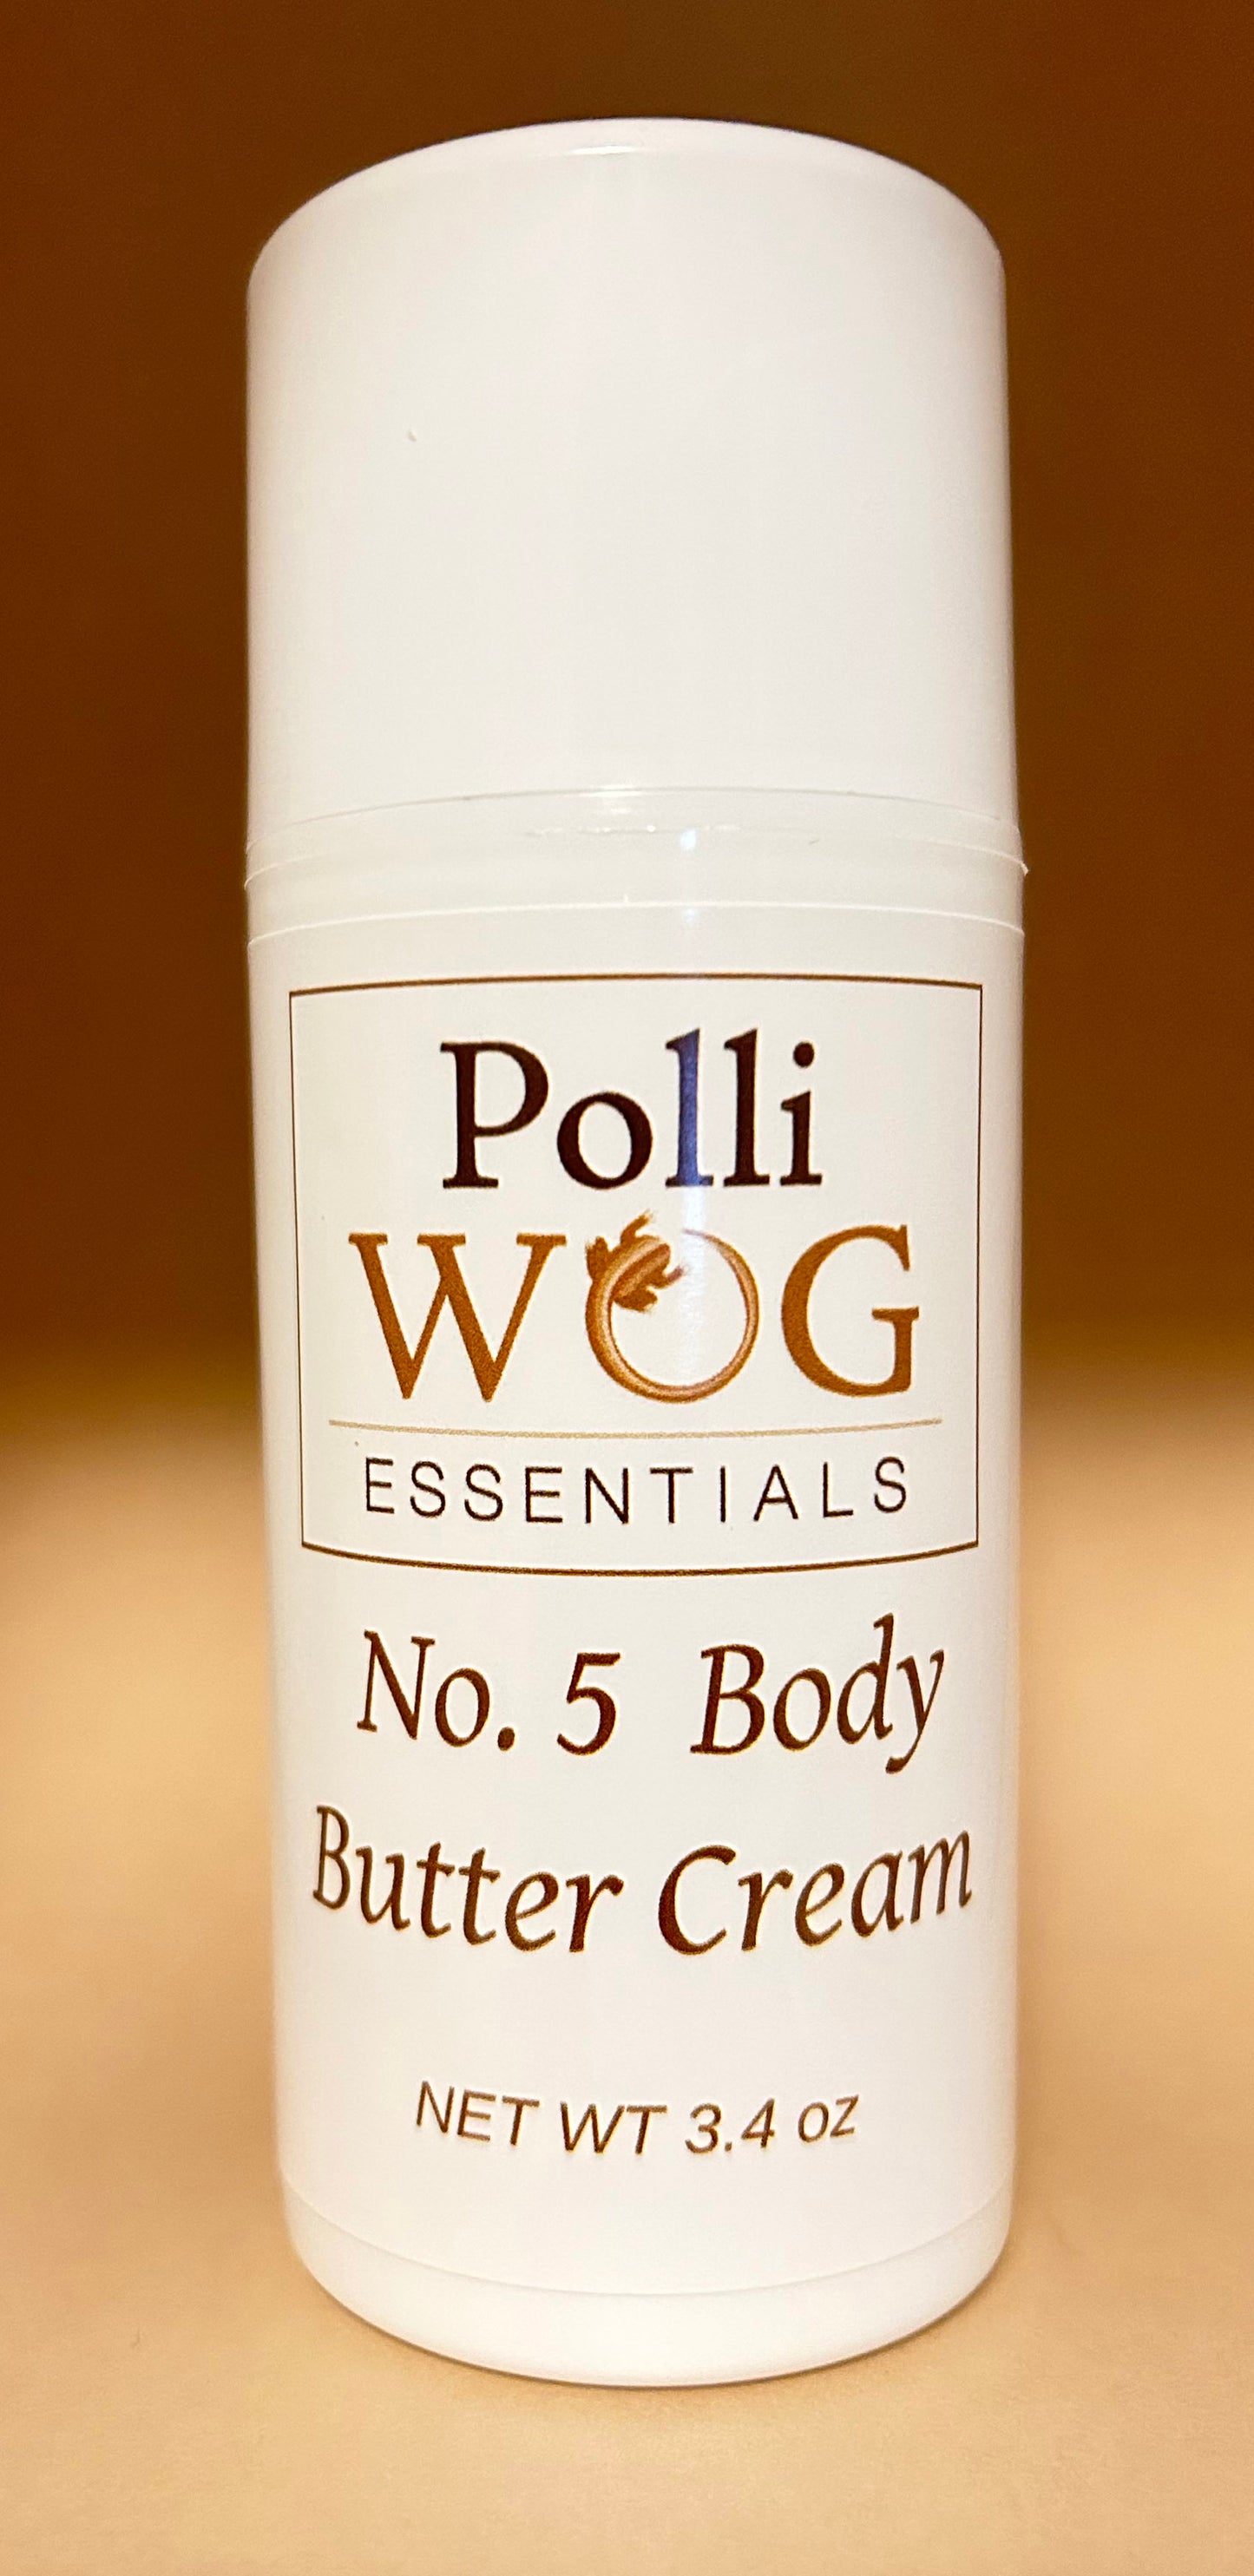 No. 5 Body Butter Cream-New and improved!